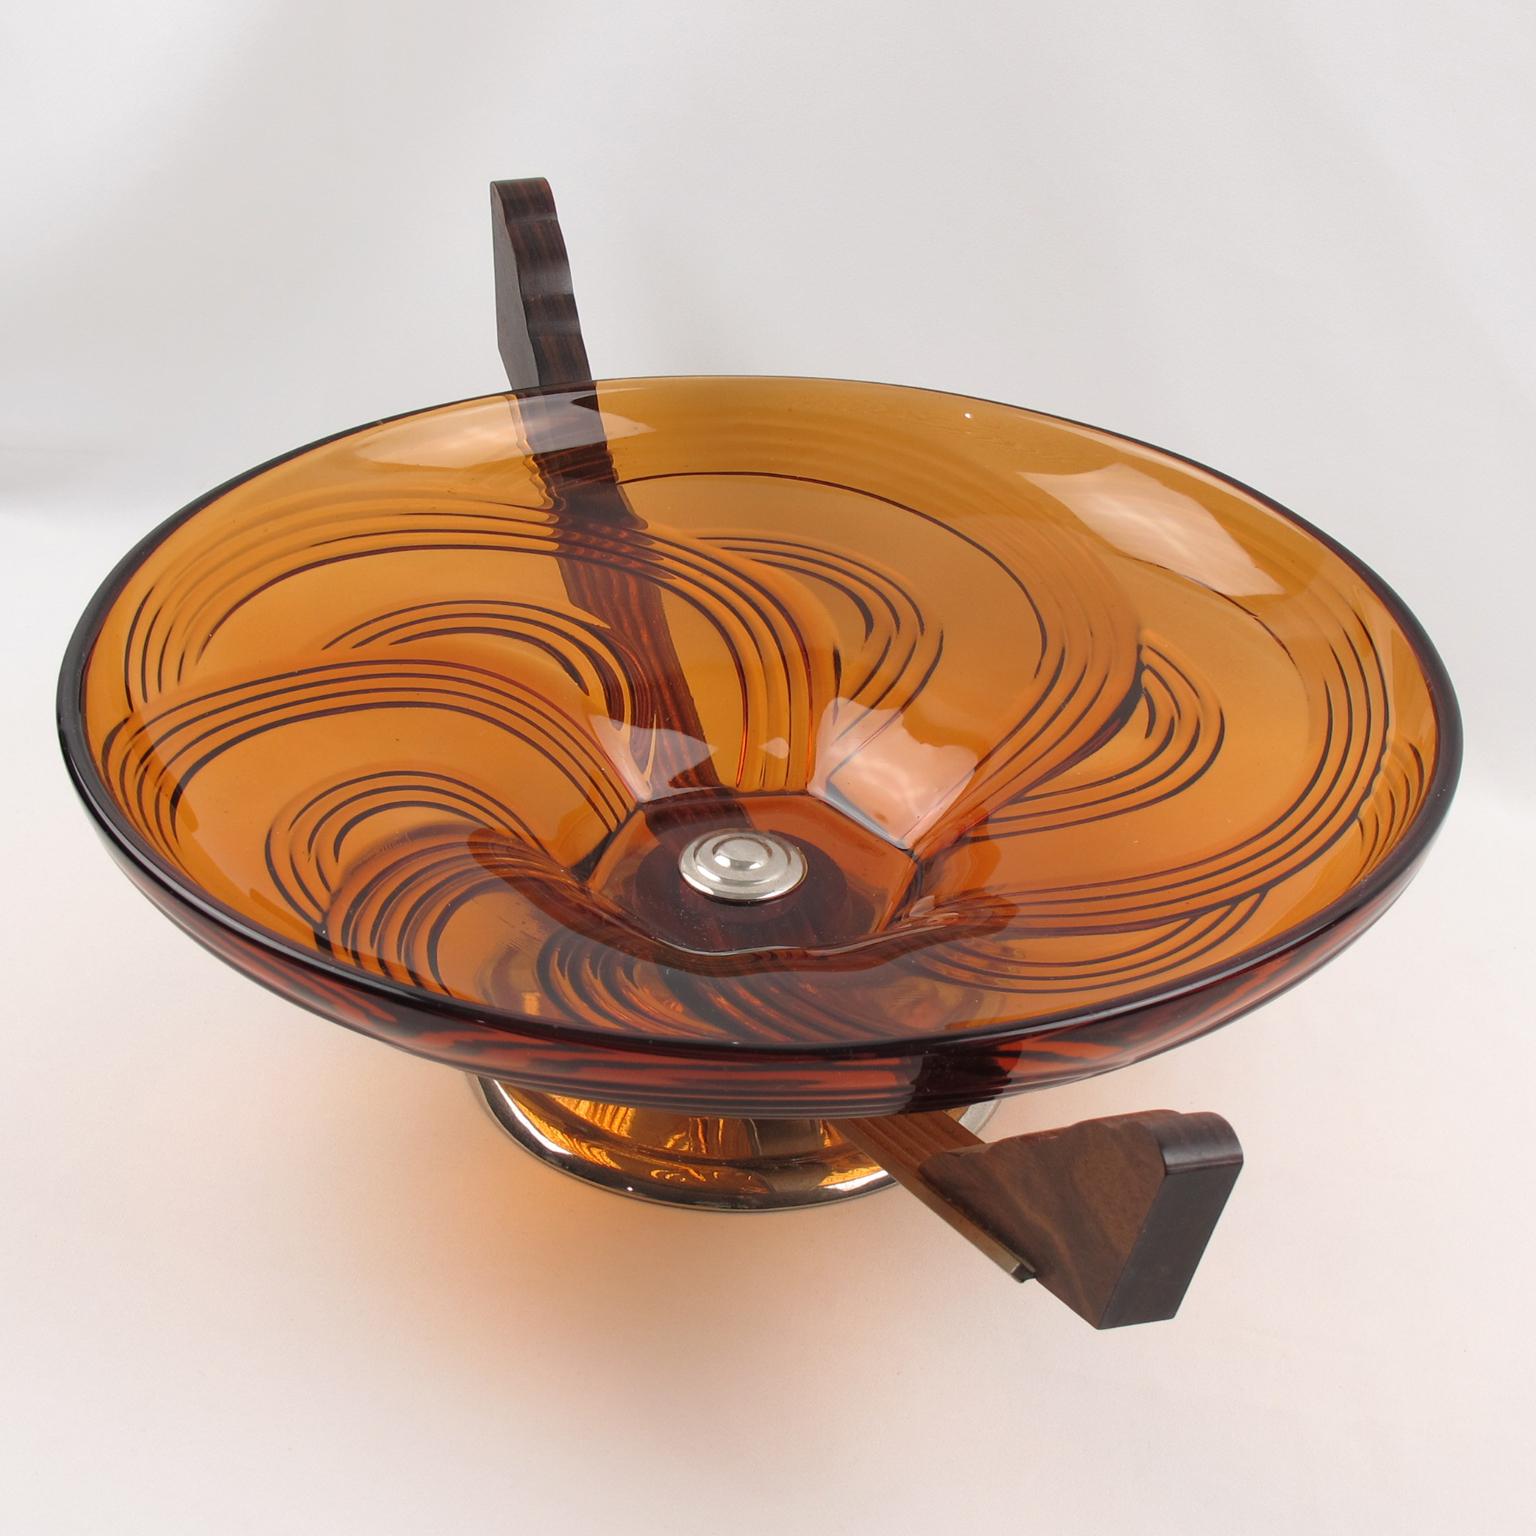 Art Deco Macassar Wood and Glass Centerpiece Bowl, 1930s For Sale 1